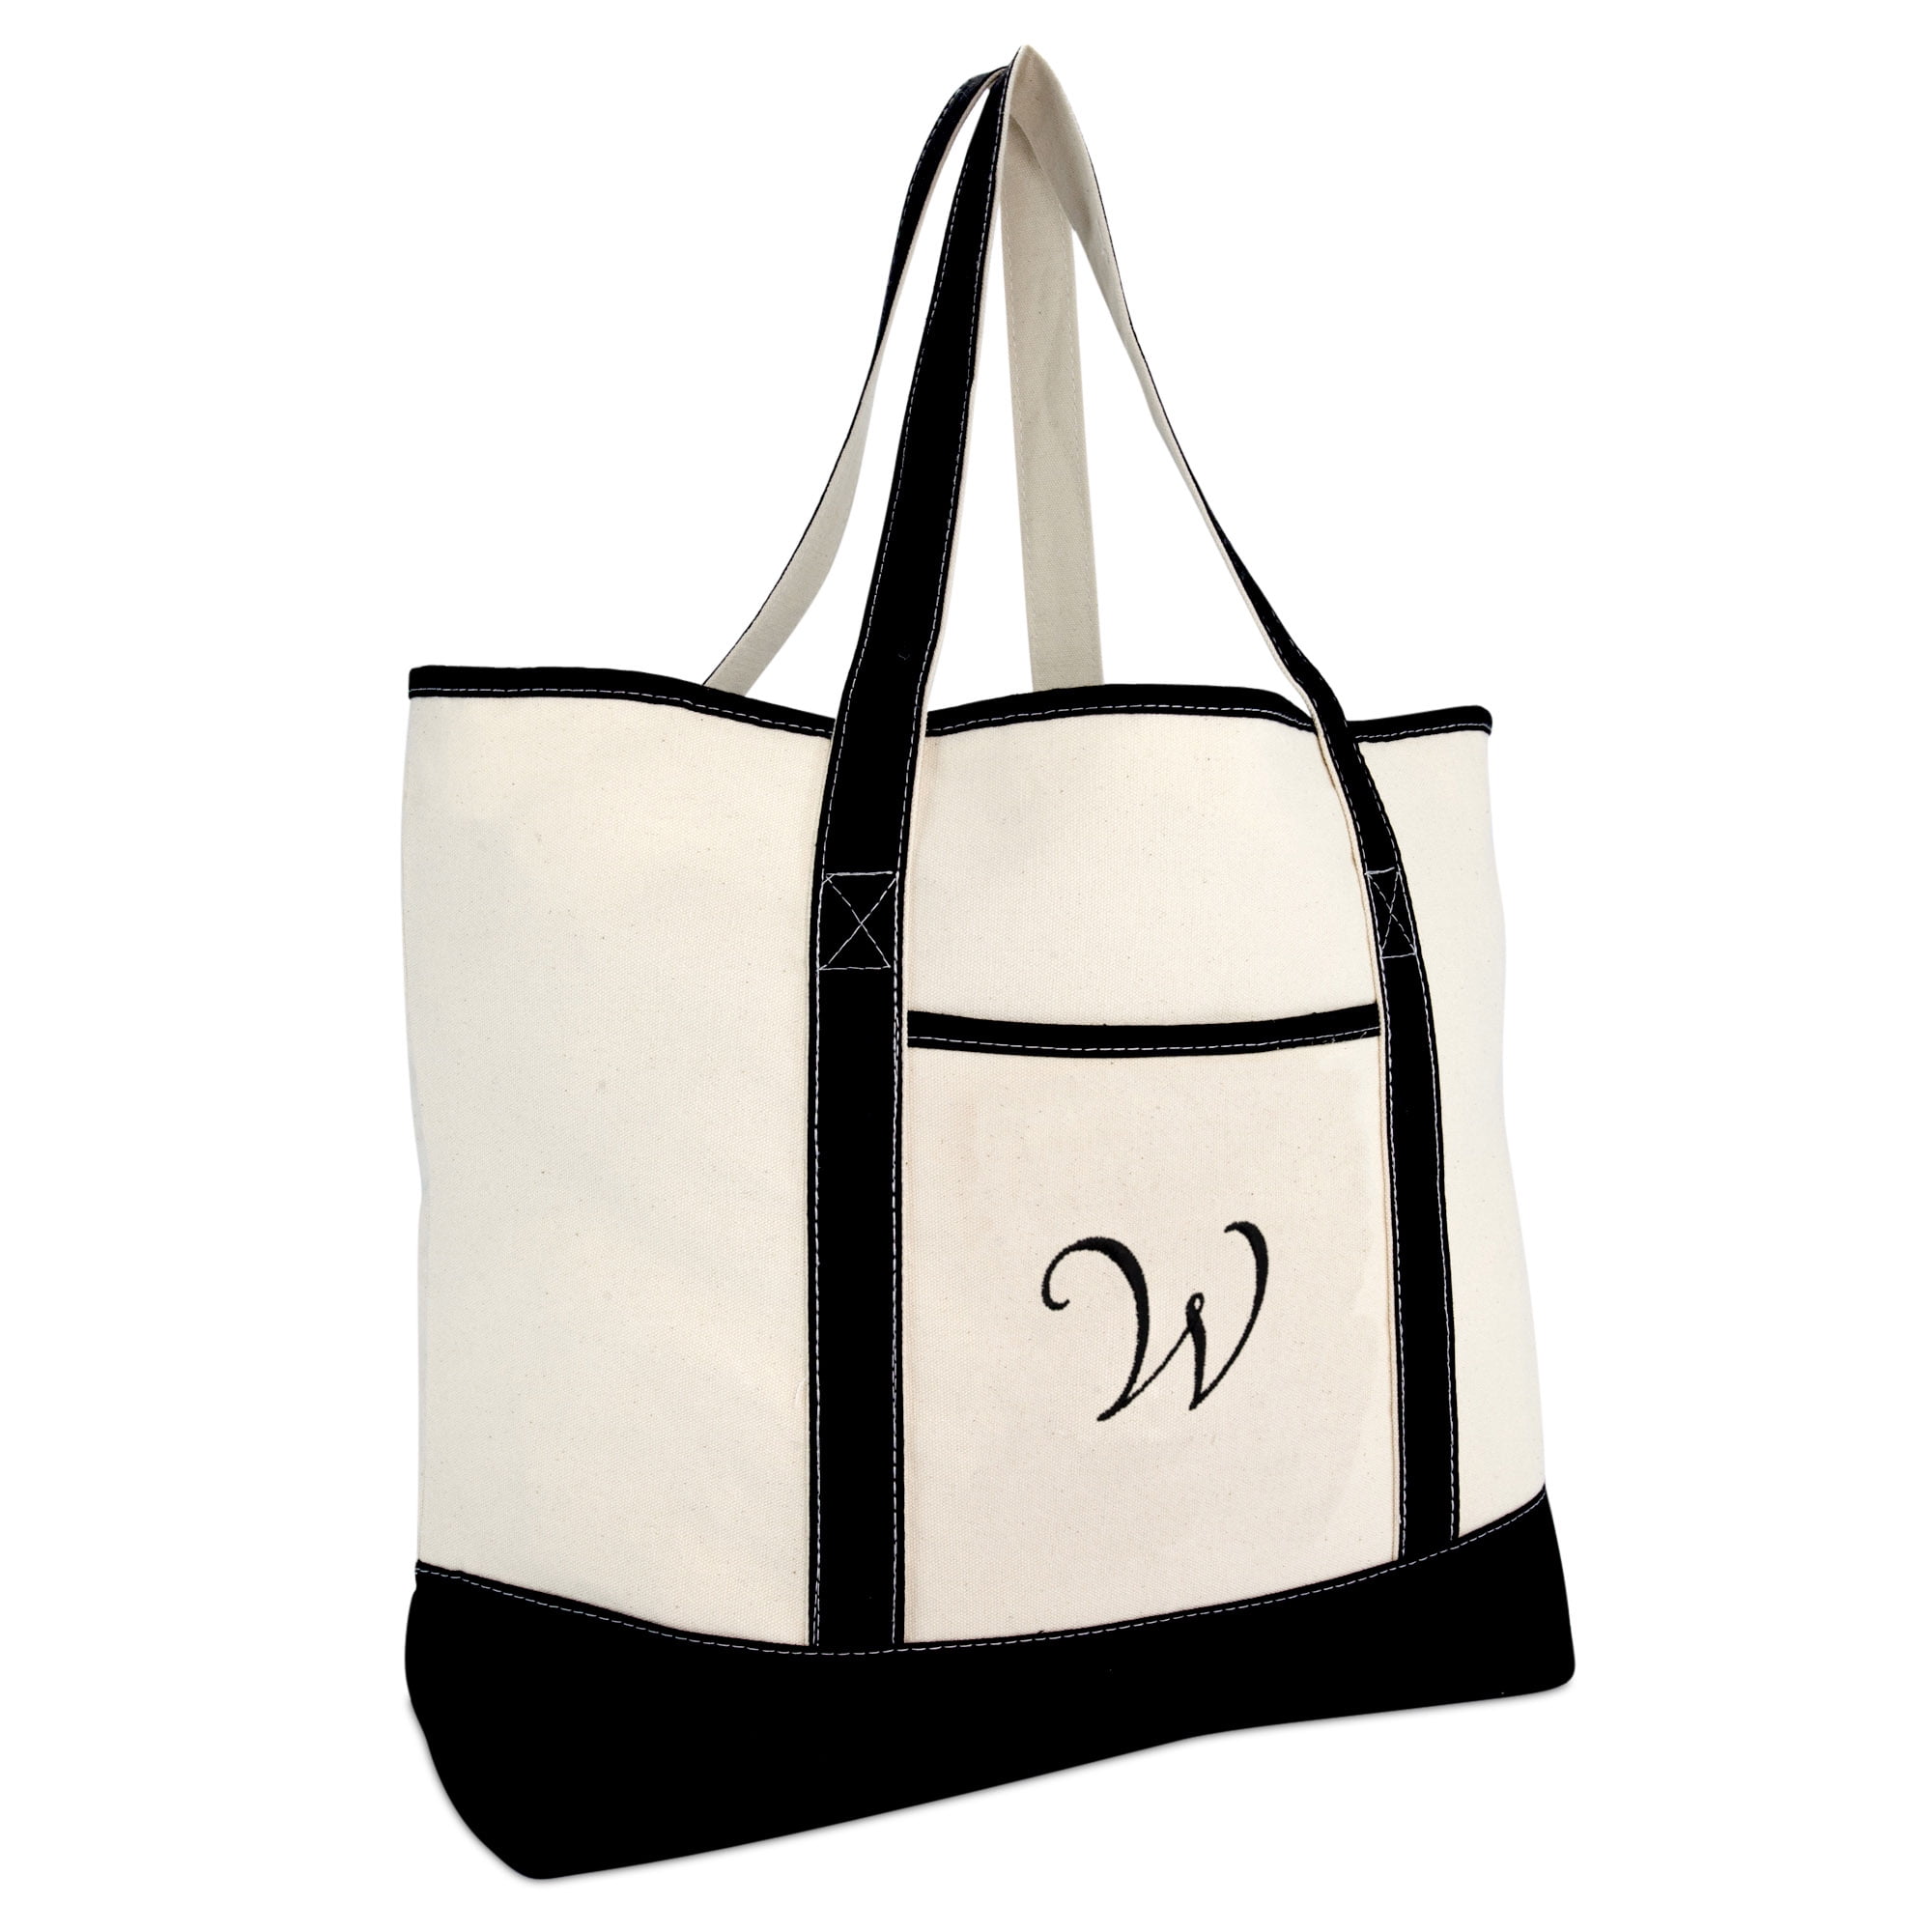 DALIX Monogram Bag Personalized Totes For Women Open Top Black Letter W - 0